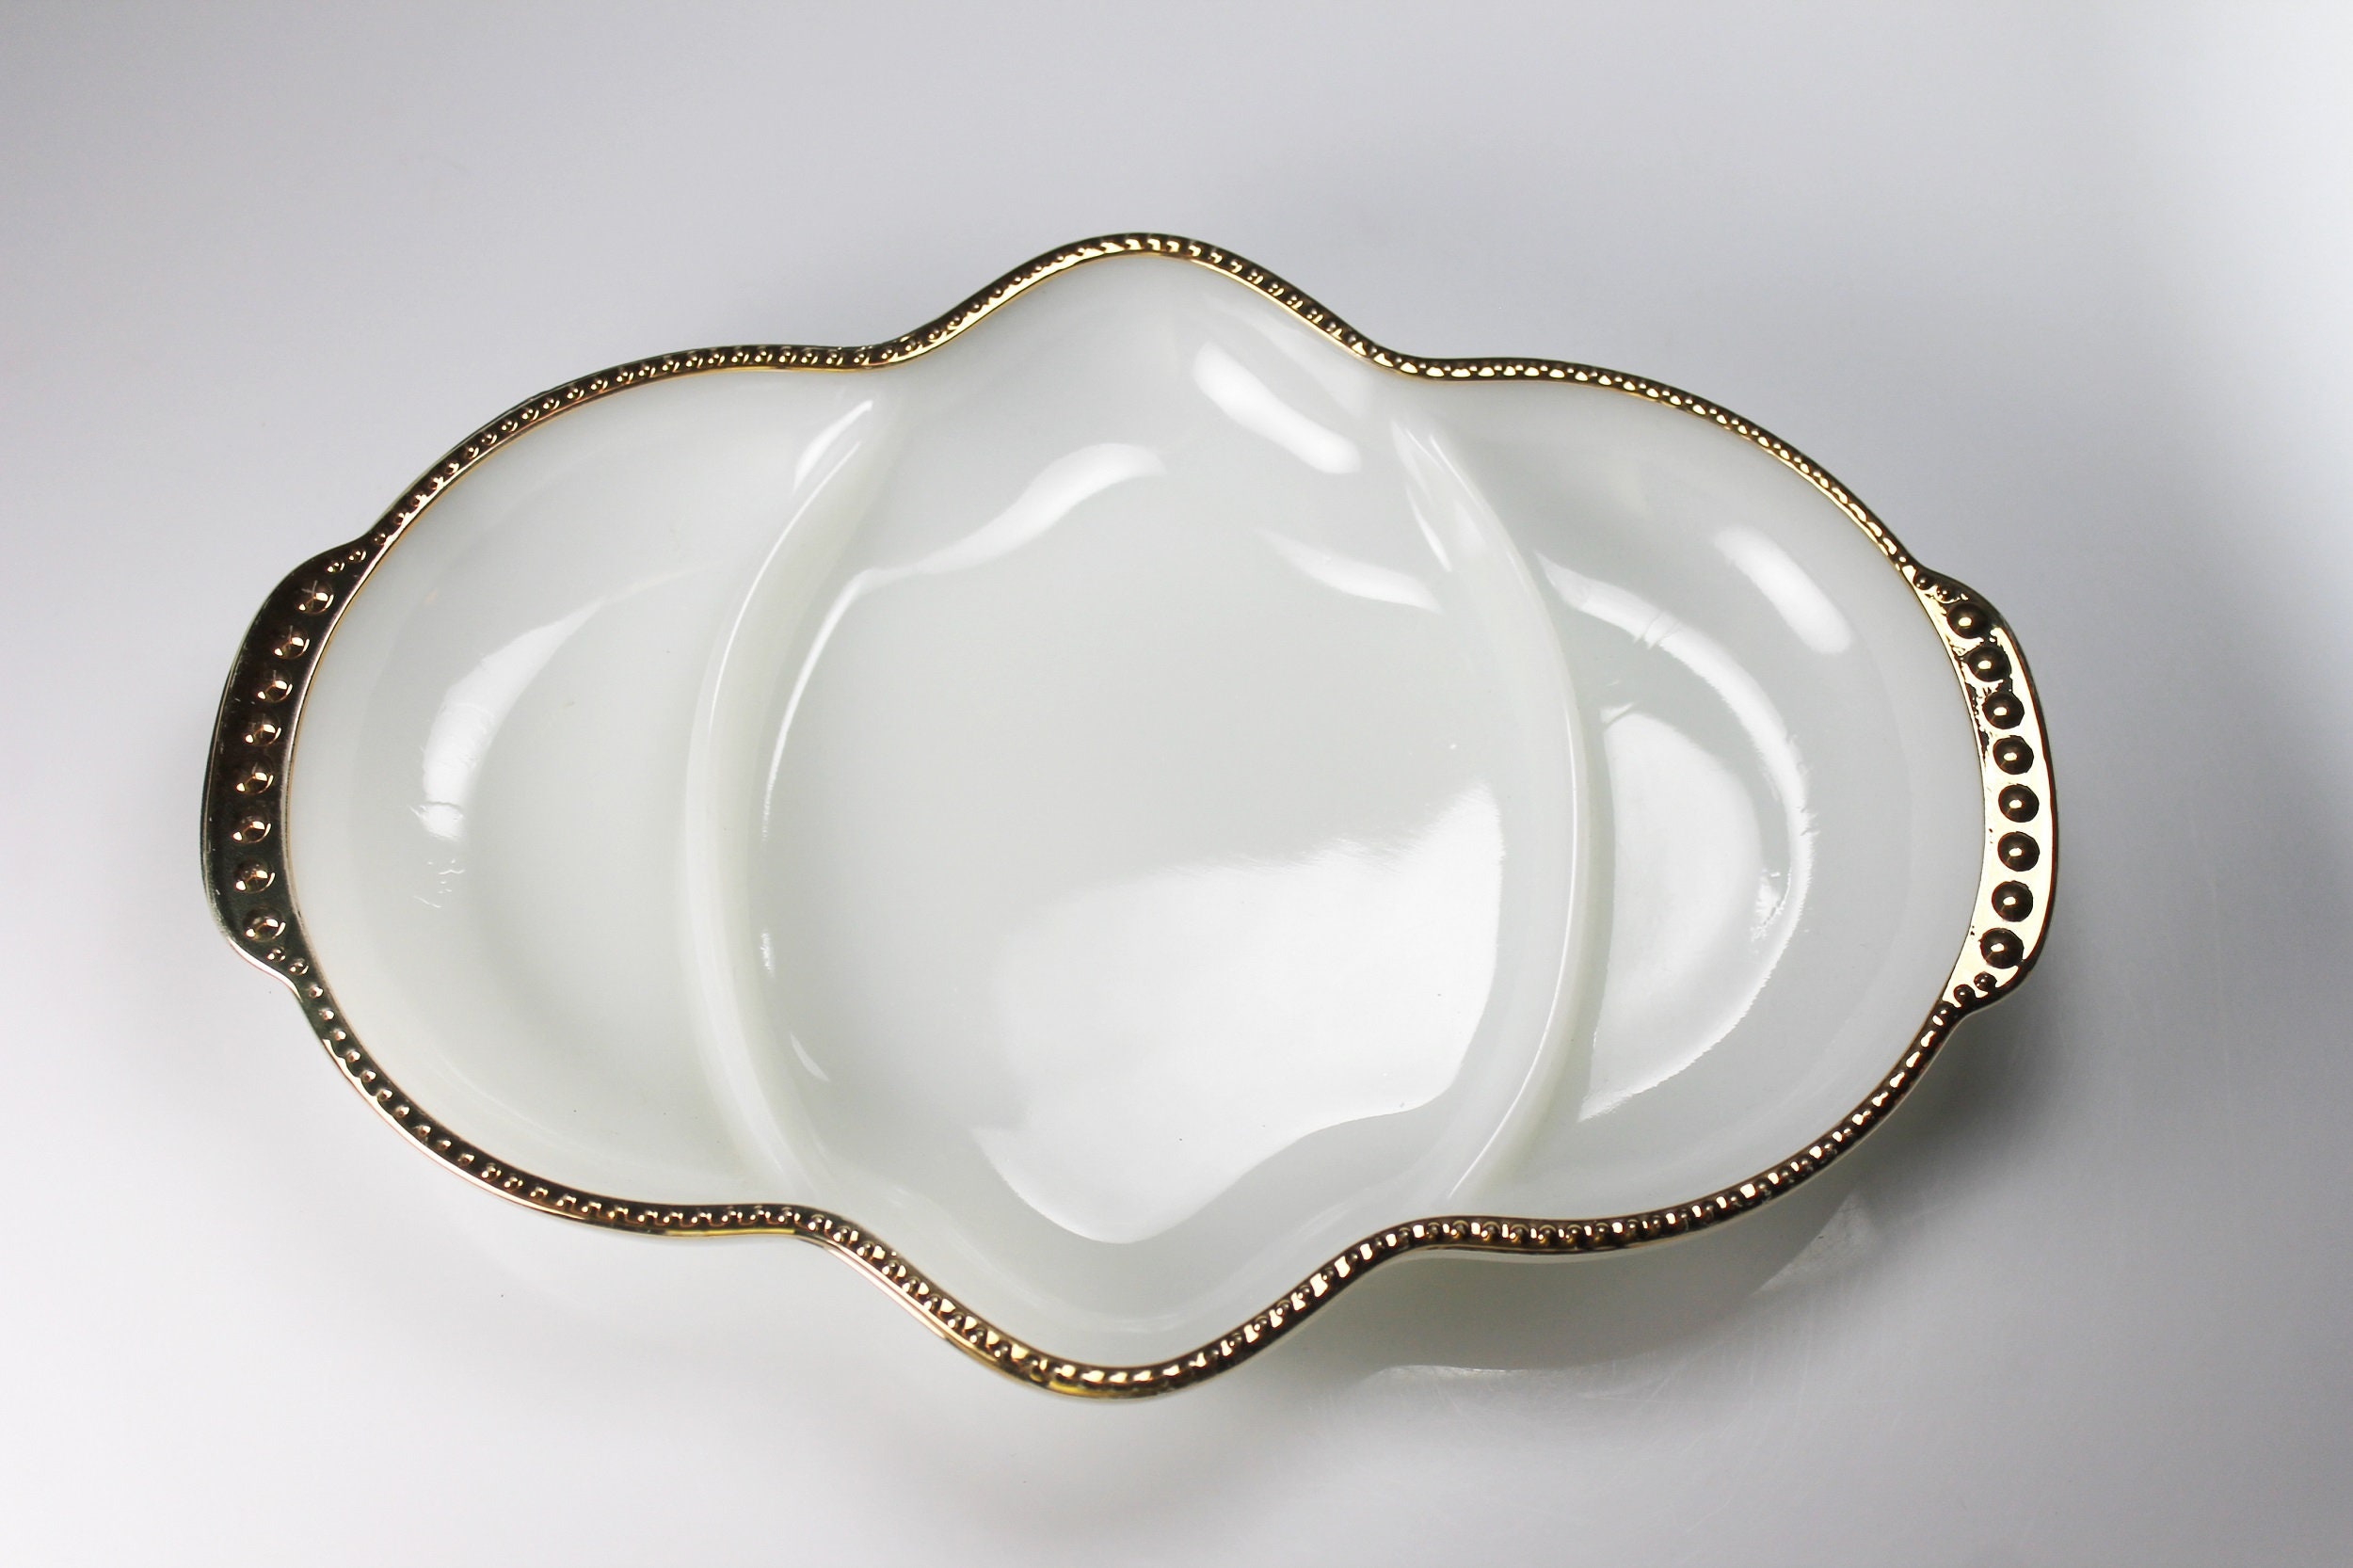 Fire King White Milk Glass with Gold Trim Divided Dish Serving Plate Made in USA